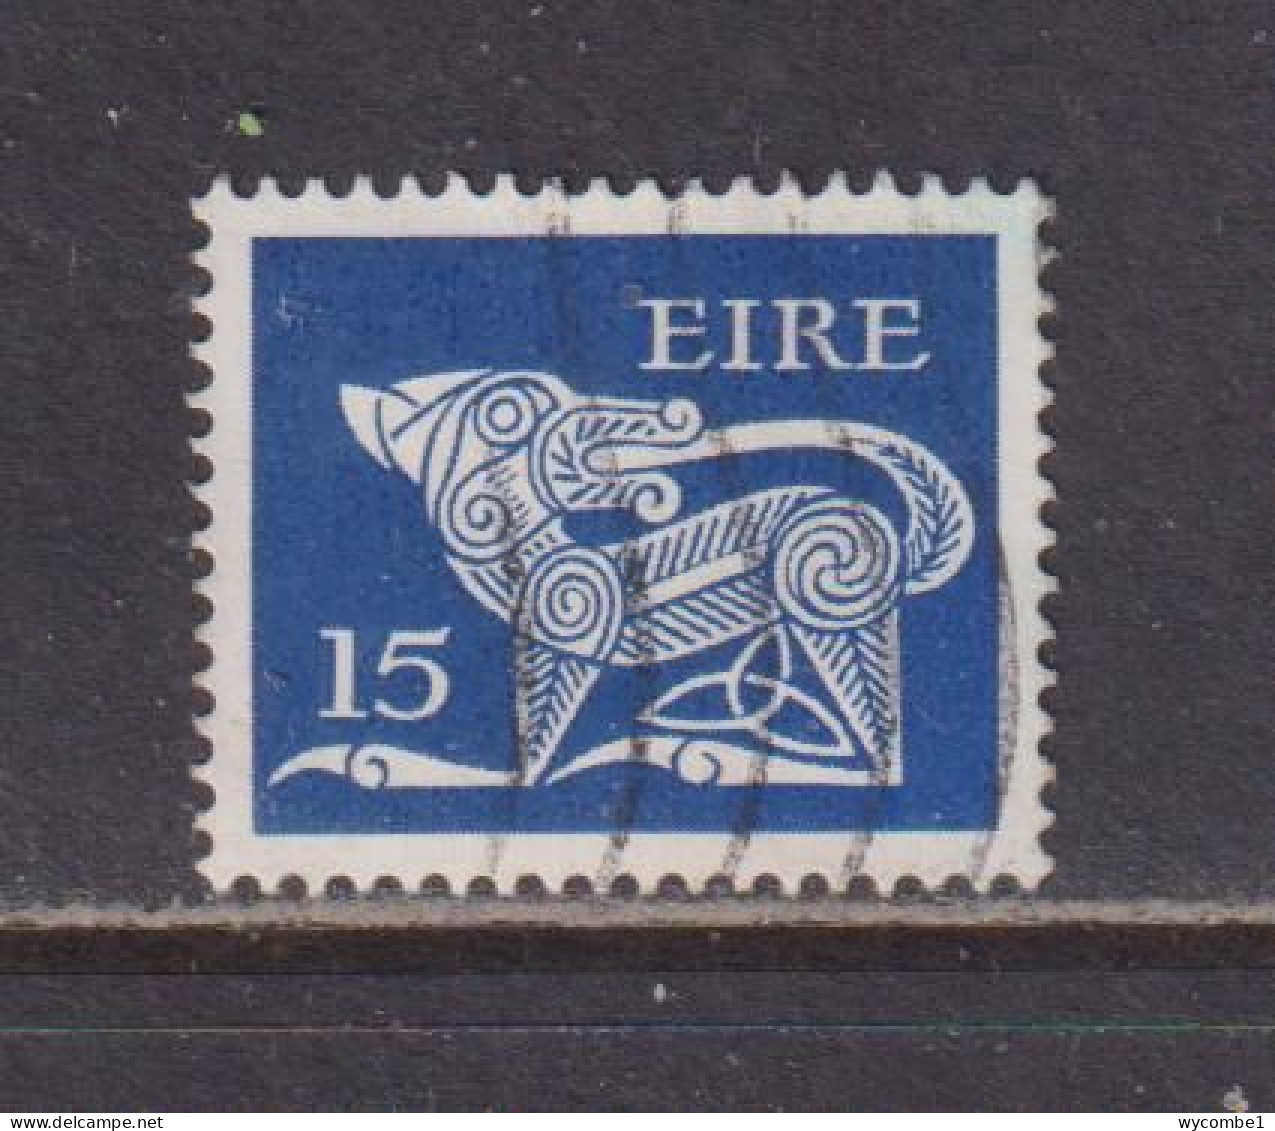 IRELAND - 1971  Decimal Currency Definitives  15p  Used As Scan - Gebraucht